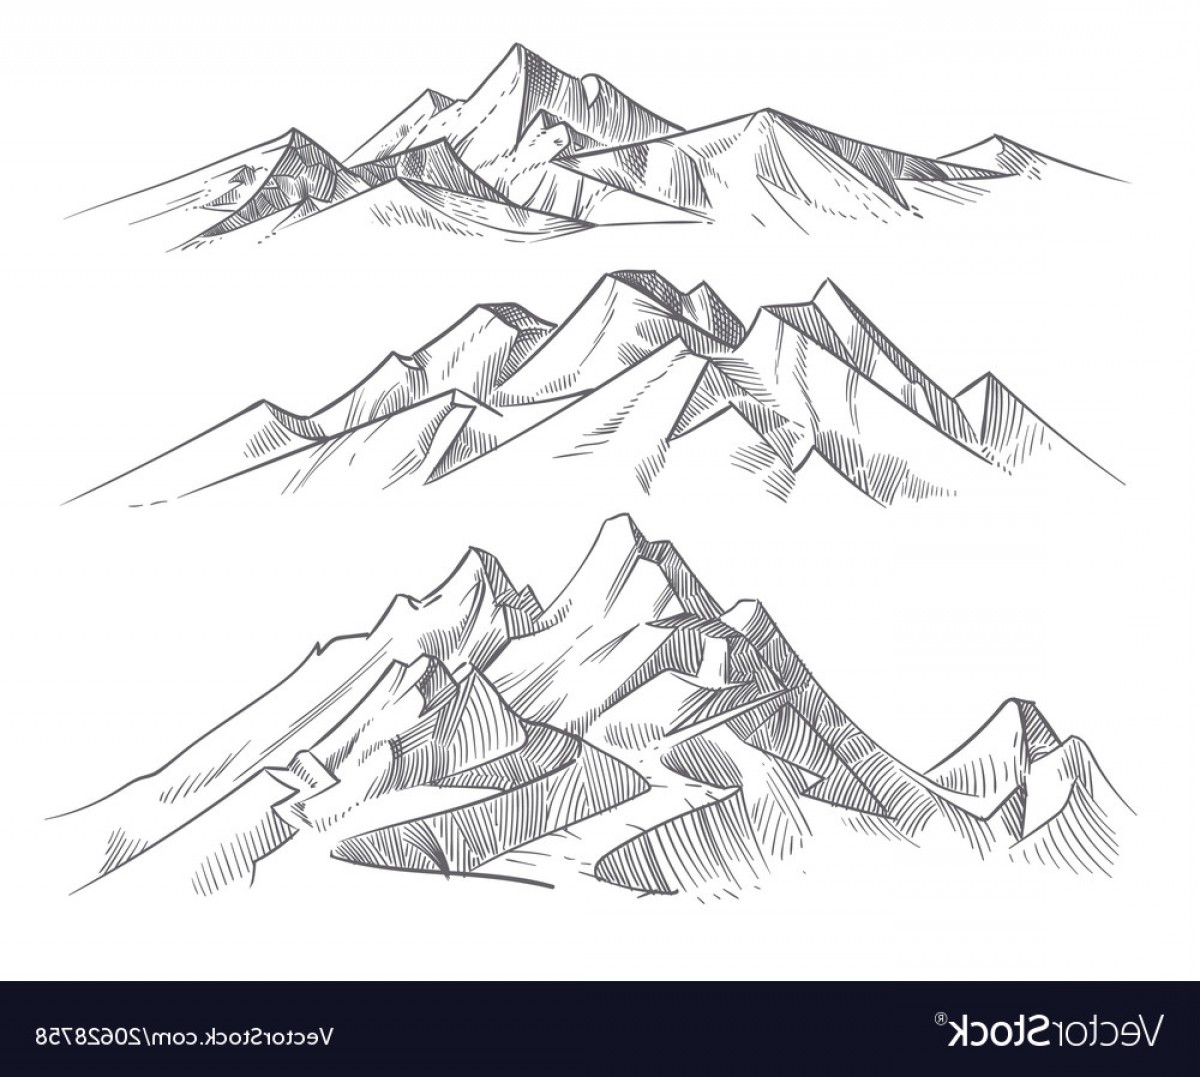  Mountain Range Sketch at PaintingValley.com Explore collection of 